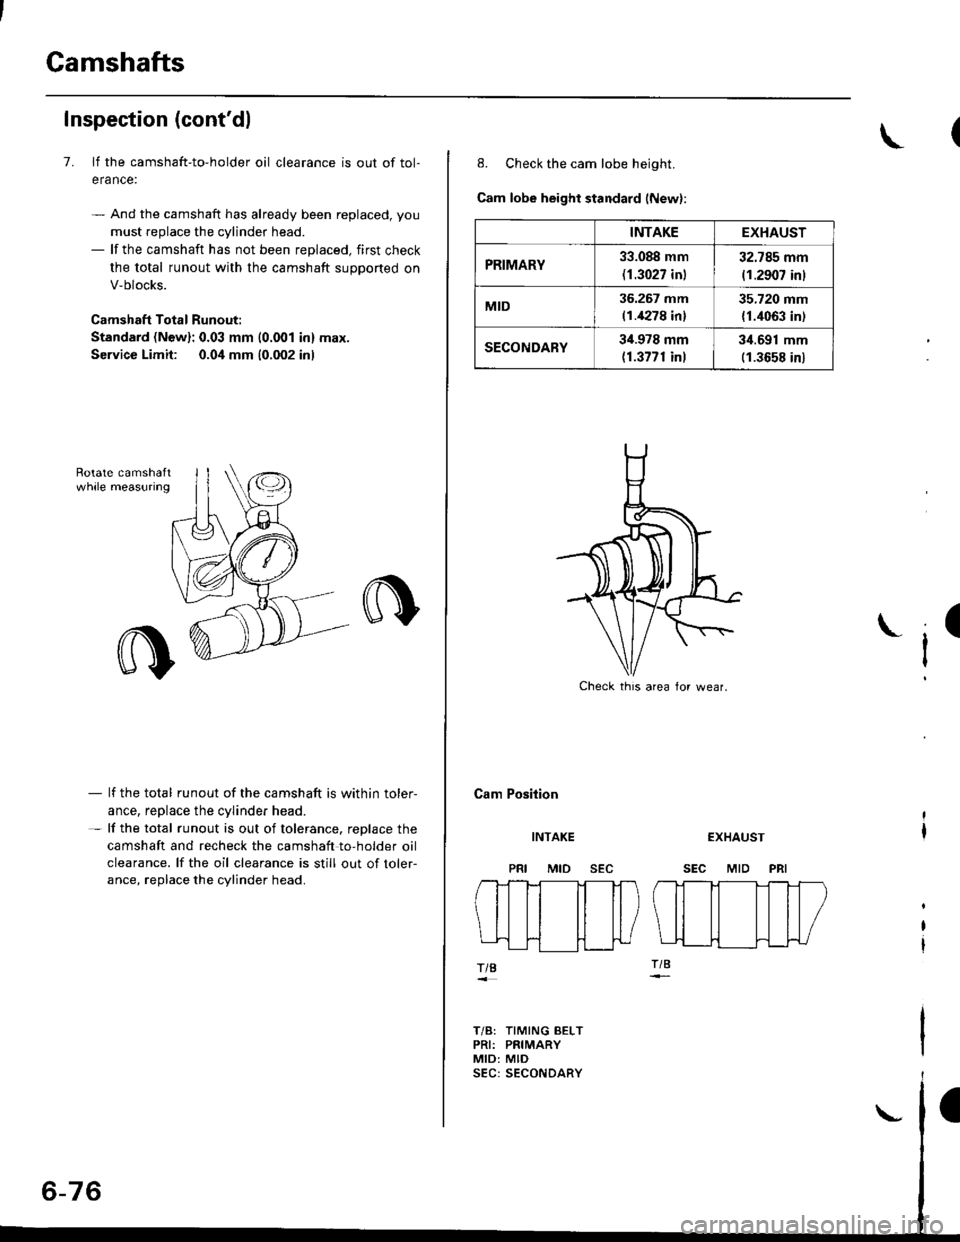 HONDA CIVIC 1996 6.G Workshop Manual Gamshafts
Inspection (contdl
7. lf the camshaft-to-holder oil clearance is out of tol-
erance:
- And the camshaft has already been replaced, you
must replace the cylinder head.- lf the camshaft has n